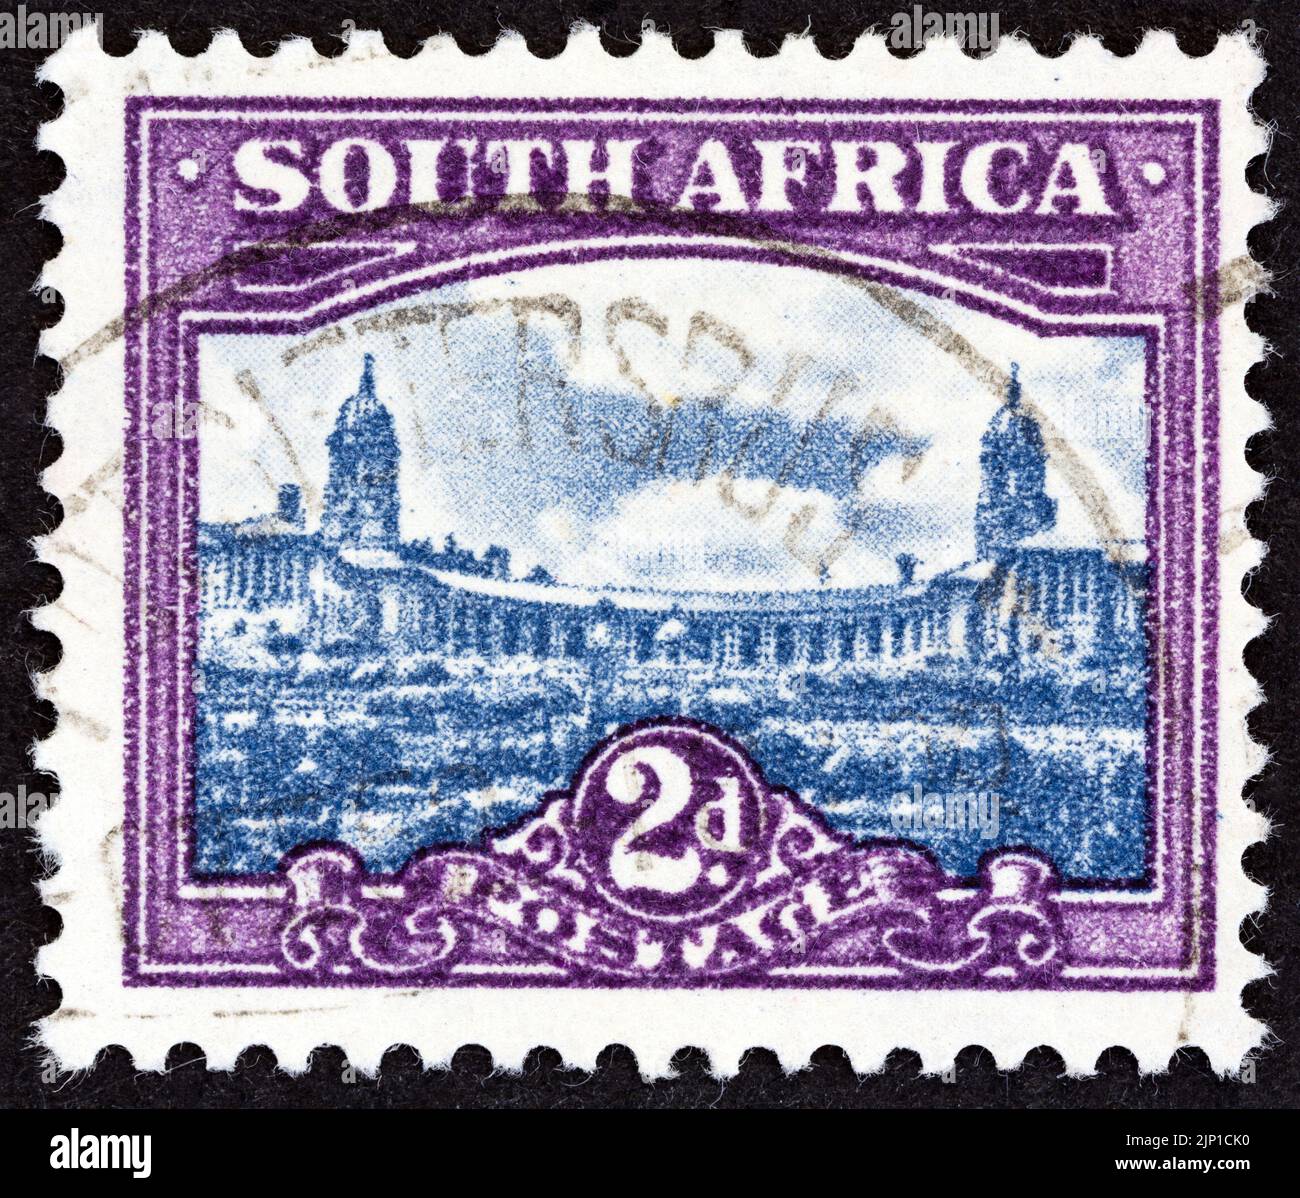 SOUTH AFRICA - CIRCA 1950: A stamp printed in South Africa from the 'South African Architecture' issue shows Union Buildings, Pretoria, circa 1950. Stock Photo